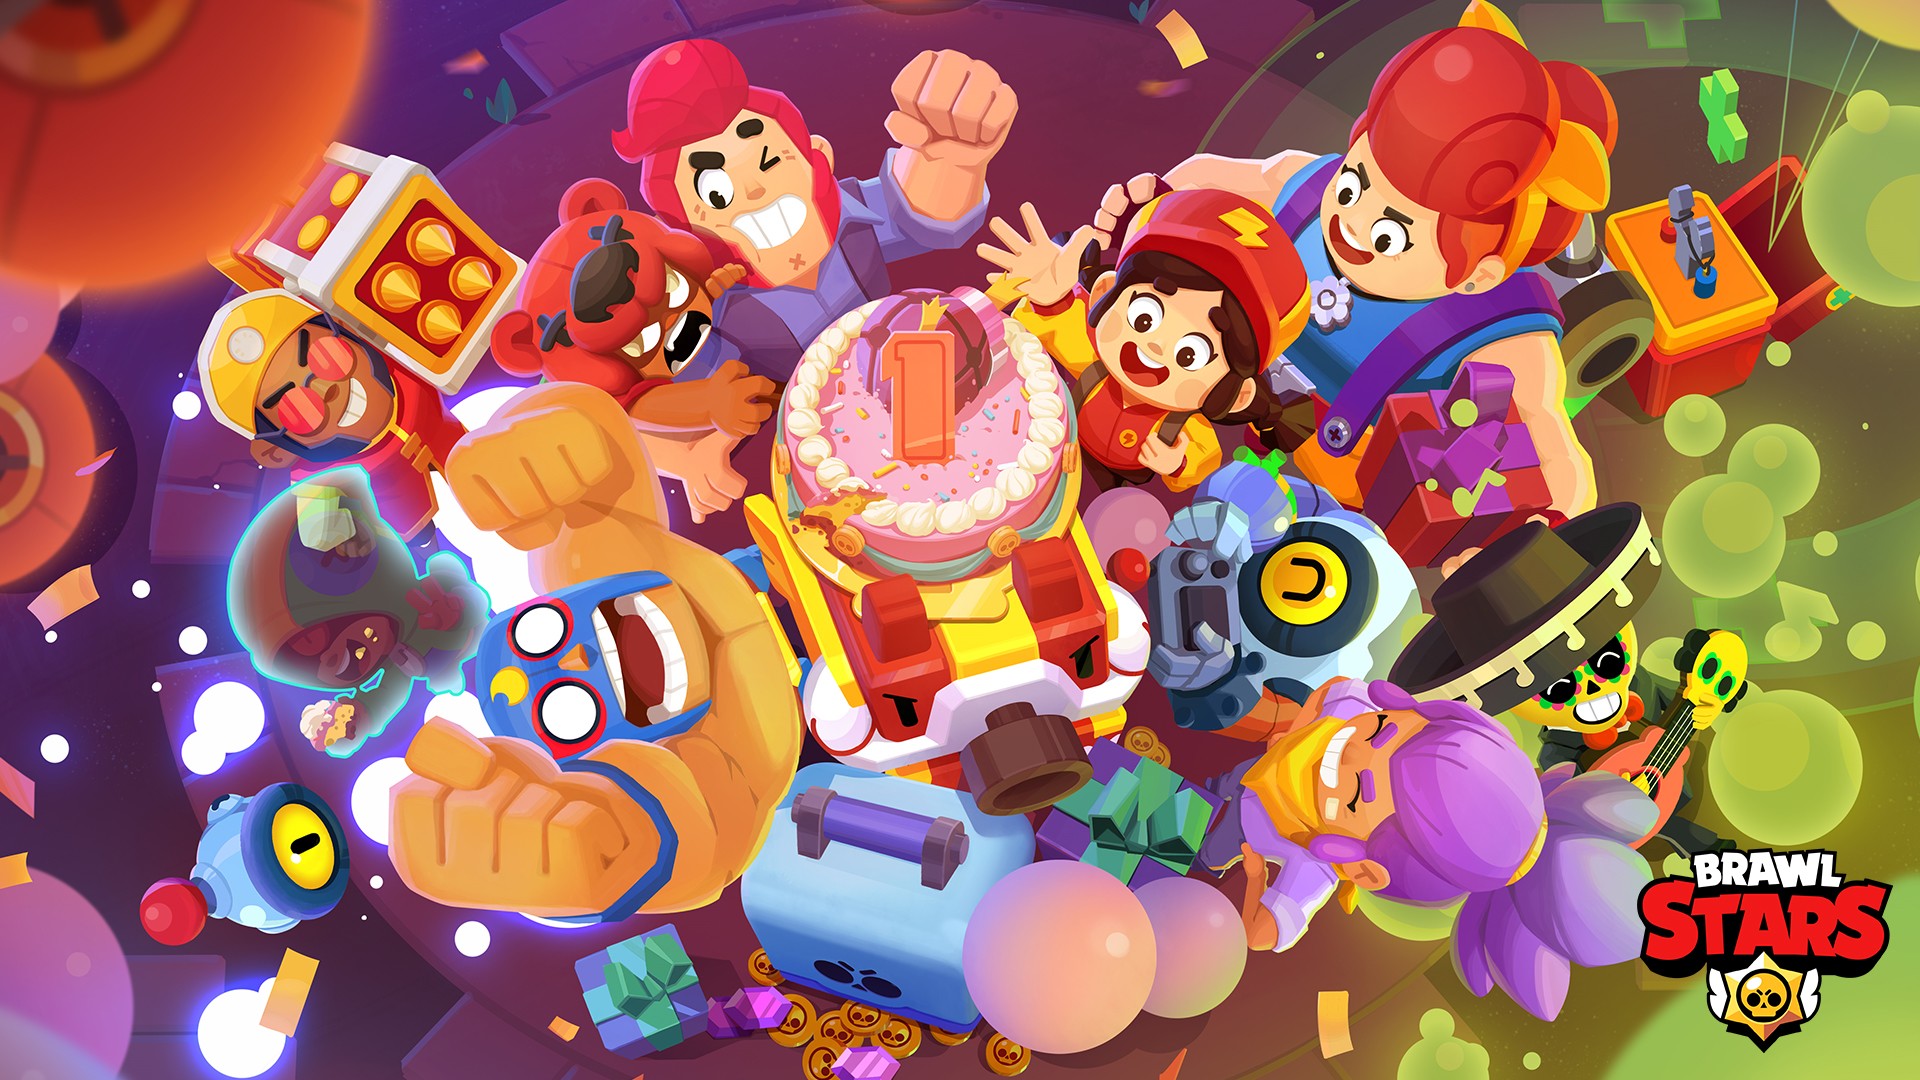 Free Boxes And Skins Up For Grabs In Brawl Stars To Celebrate One Year Anniversary Of China Release Dot Esports - imagens das skins de de brawl stars